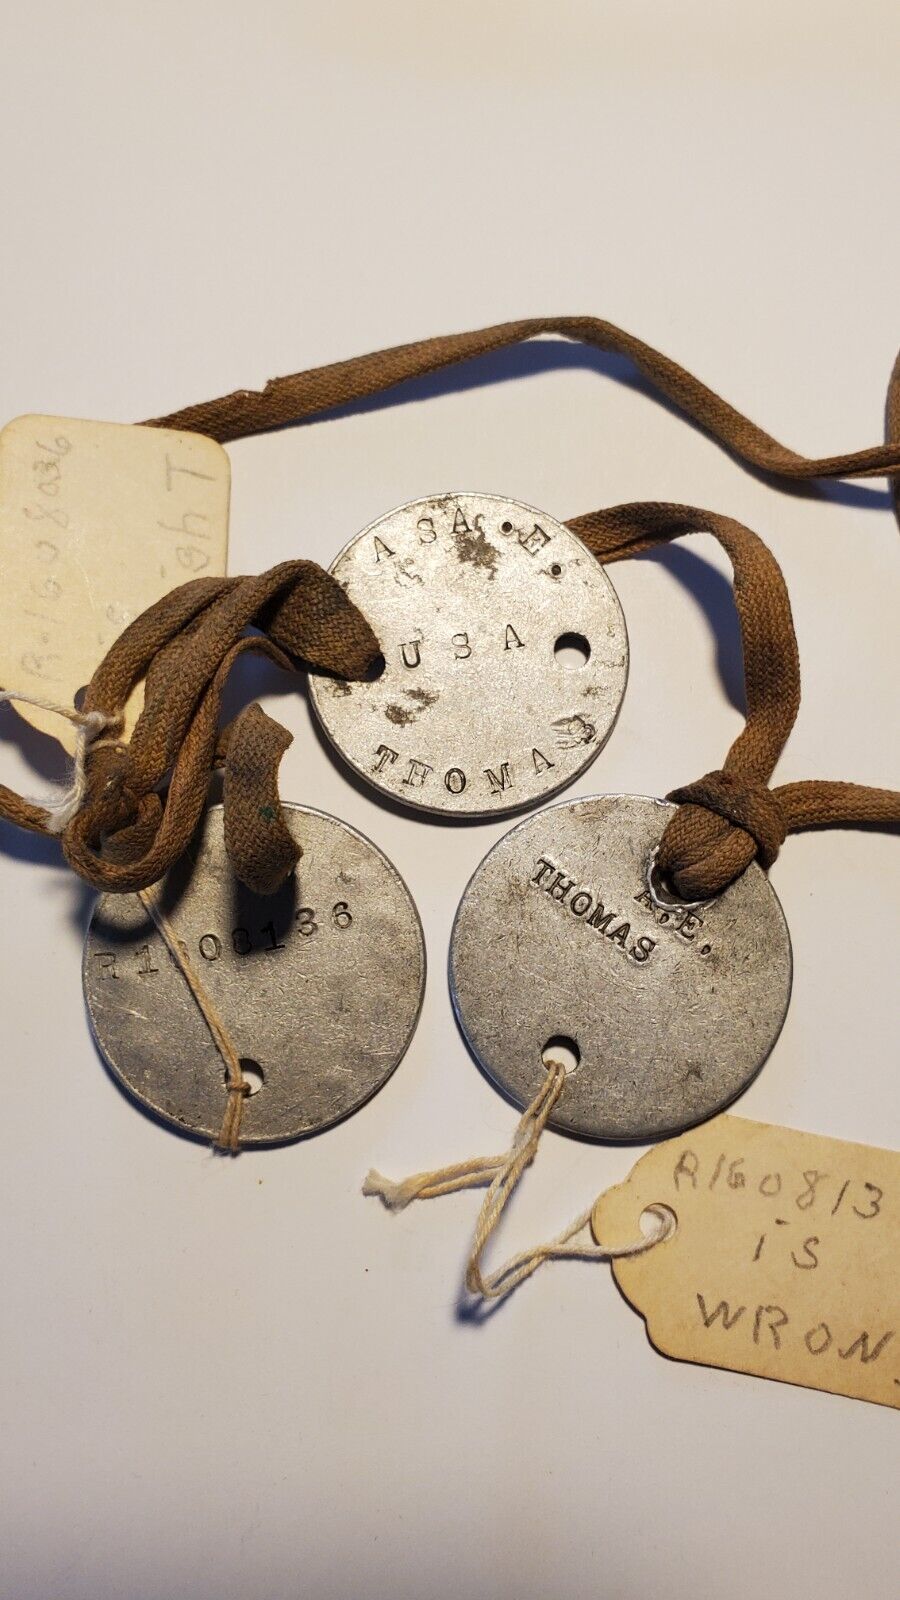 Authentic WWI US ARMY Dog Tags Asa E Thomas Original Rope Wrong ID Error Notes